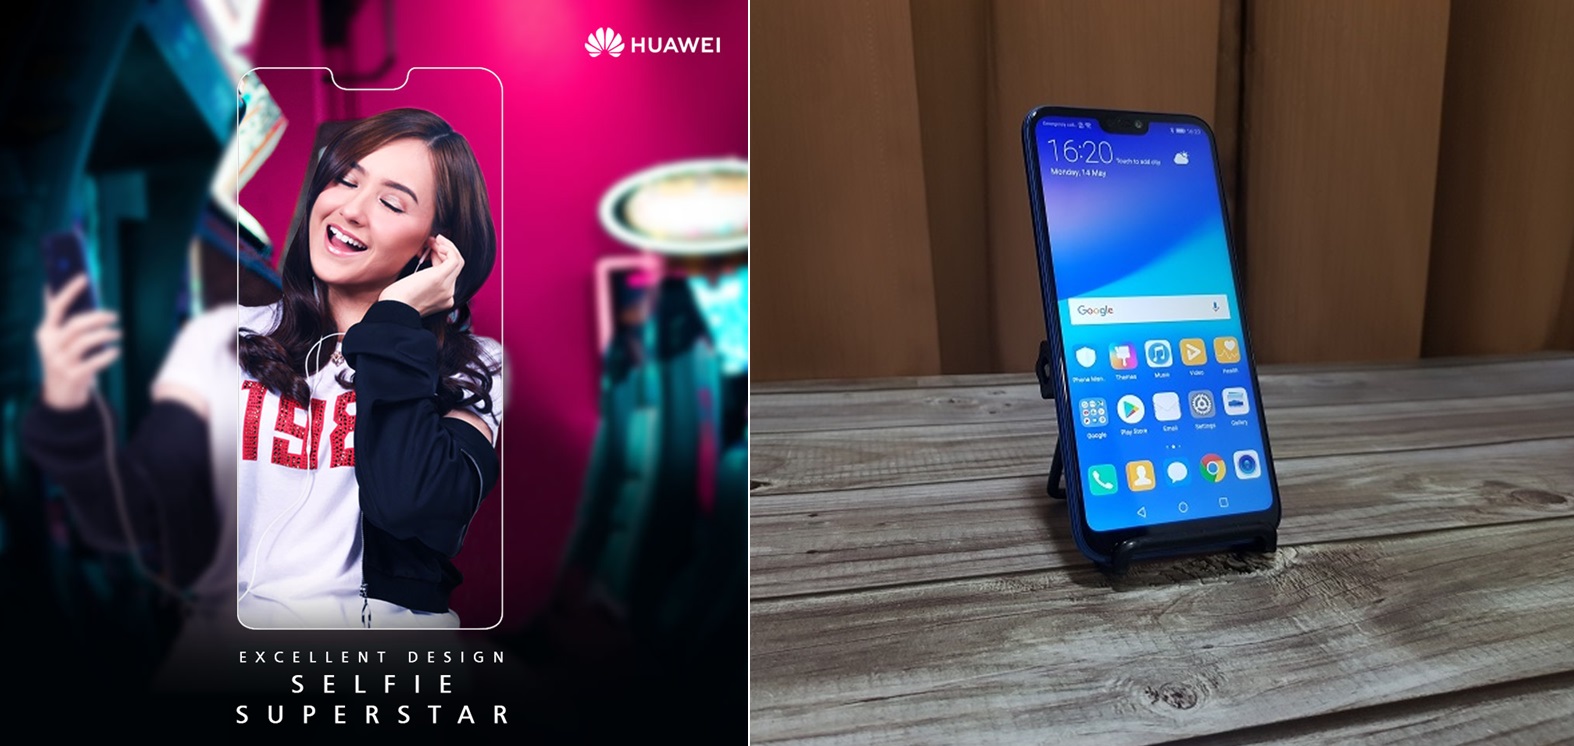 Huawei Nova 3e coming soon to Malaysia + first look hands-on pictures